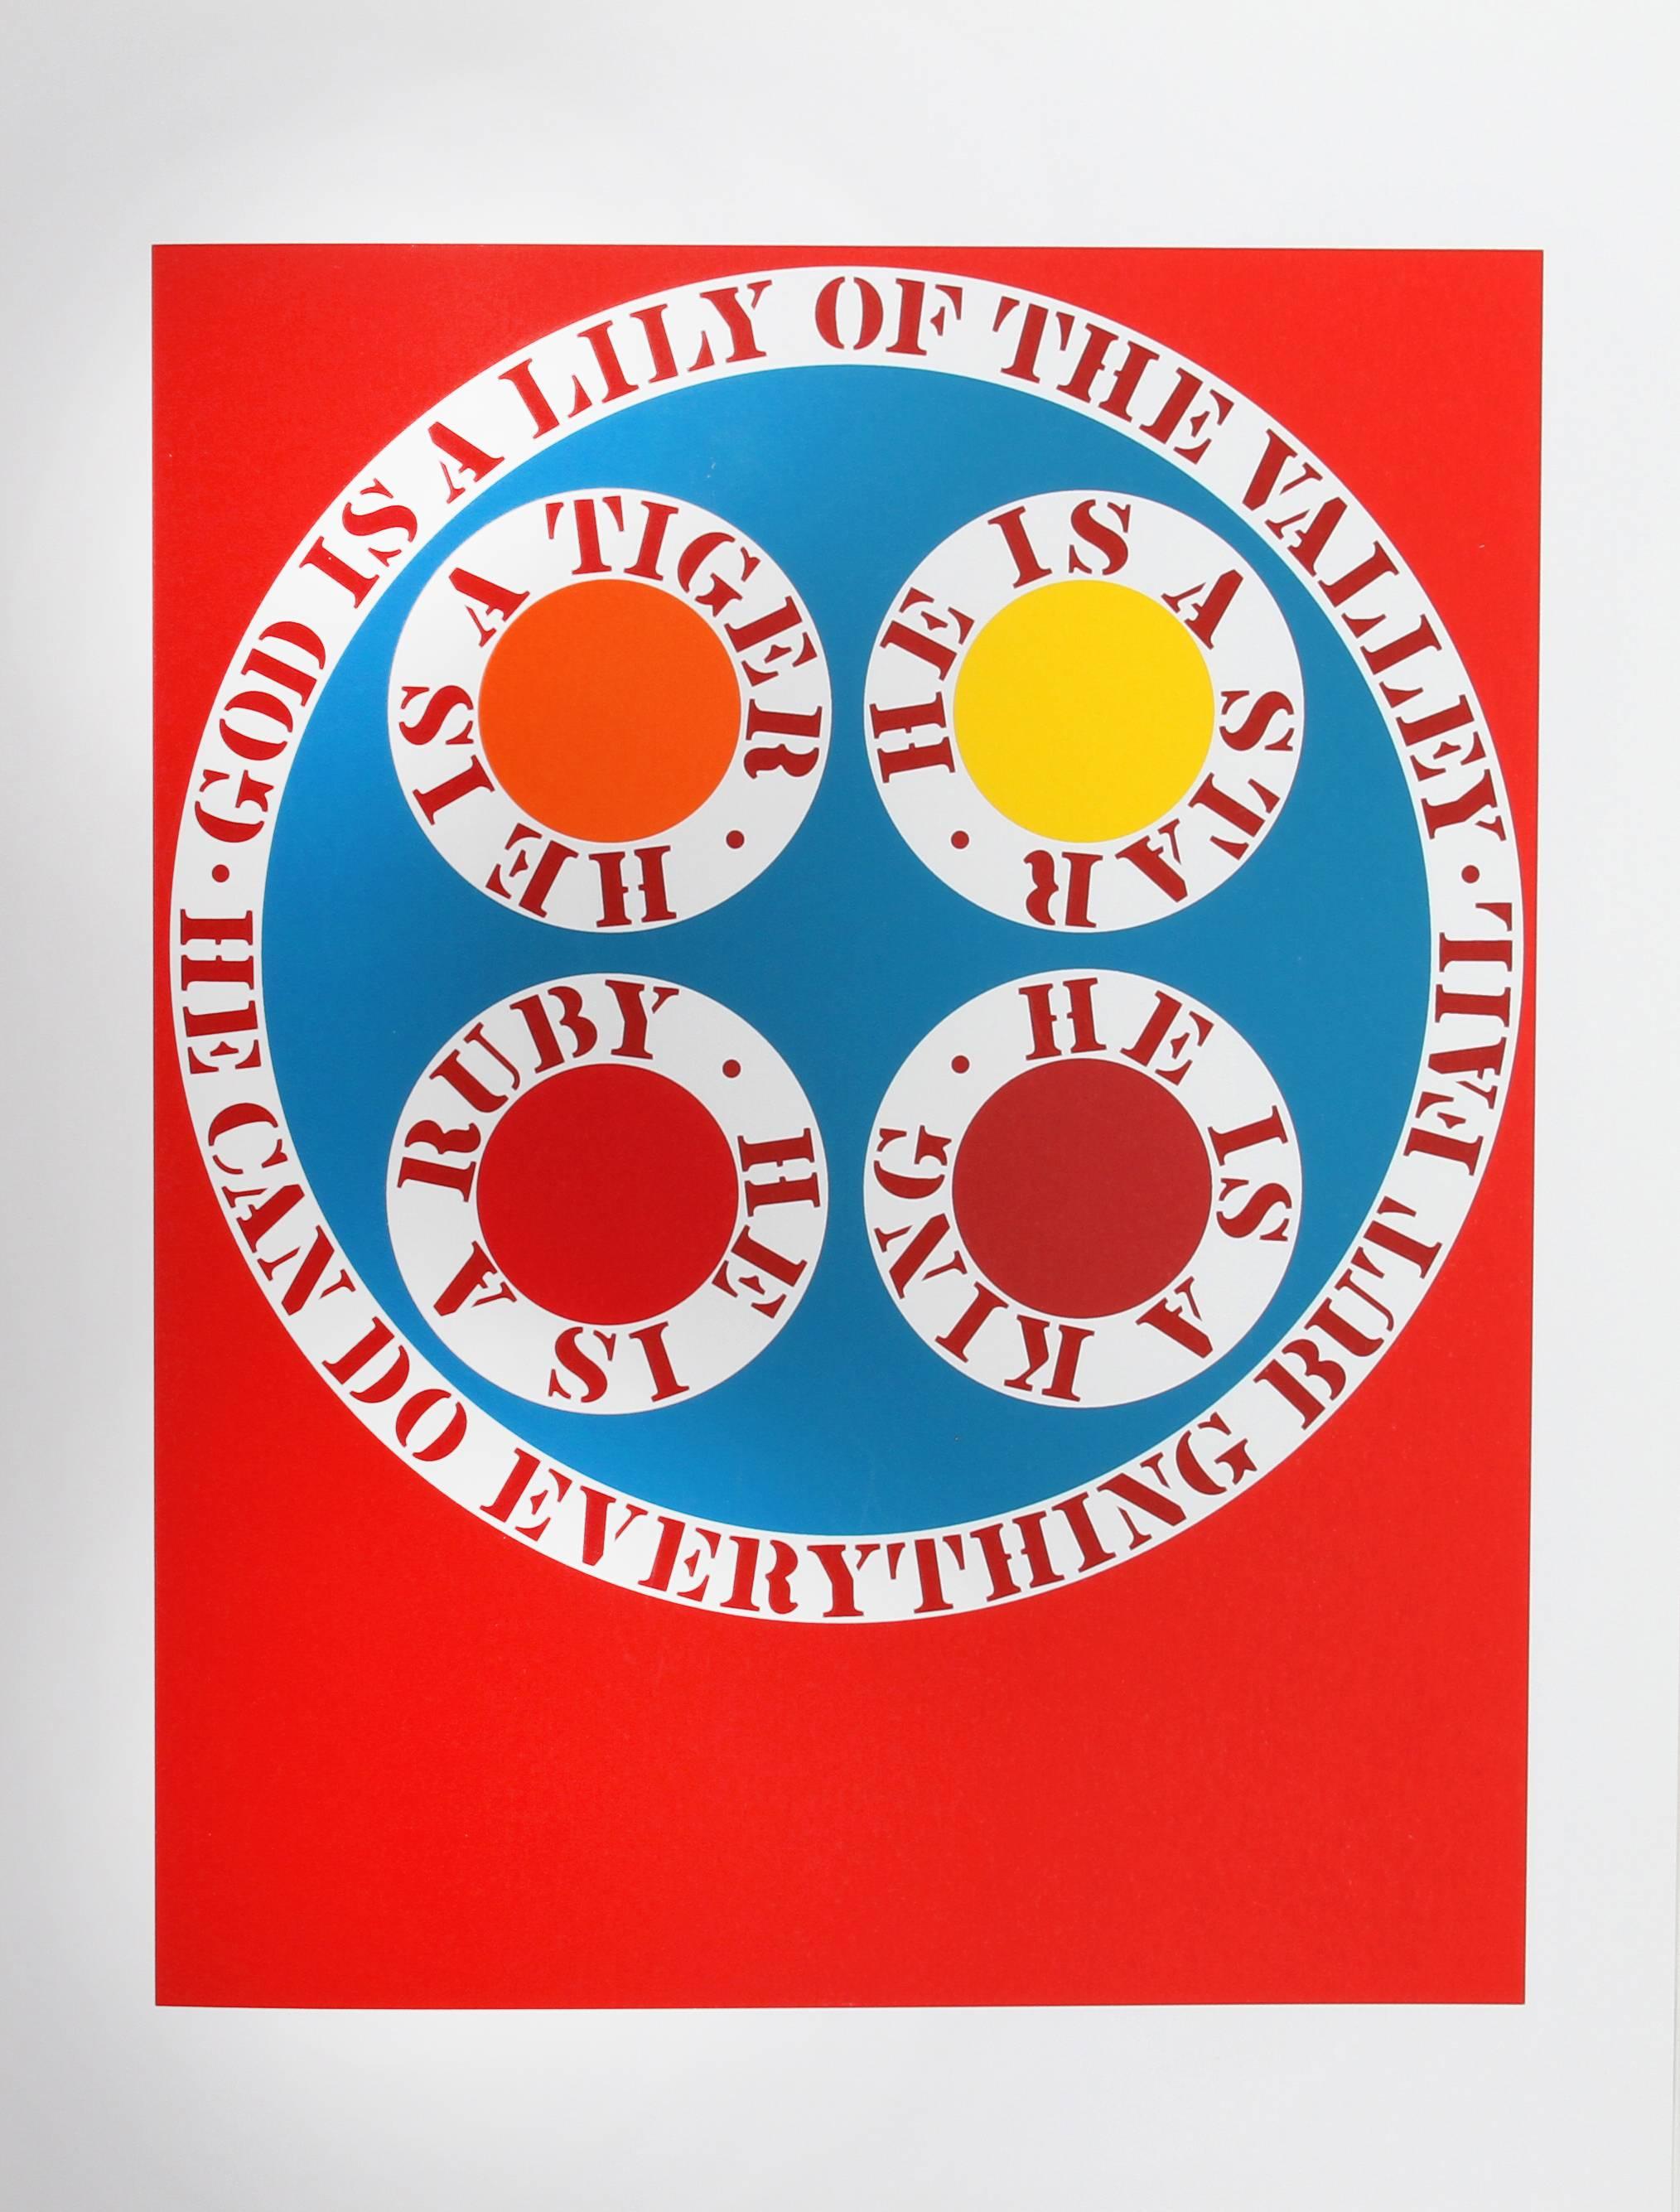 Artist: Robert Indiana, American (1928 - 2018)
Title: God is a Lily of the Valley from the American Dream Portfolio
Year: 1961-62 (1997)
Medium: Serigraph
Edition: 395
Image Size: 16.75 x 13.25 inches
Size: 22 in. x 17 in. (55.88 cm x 43.18